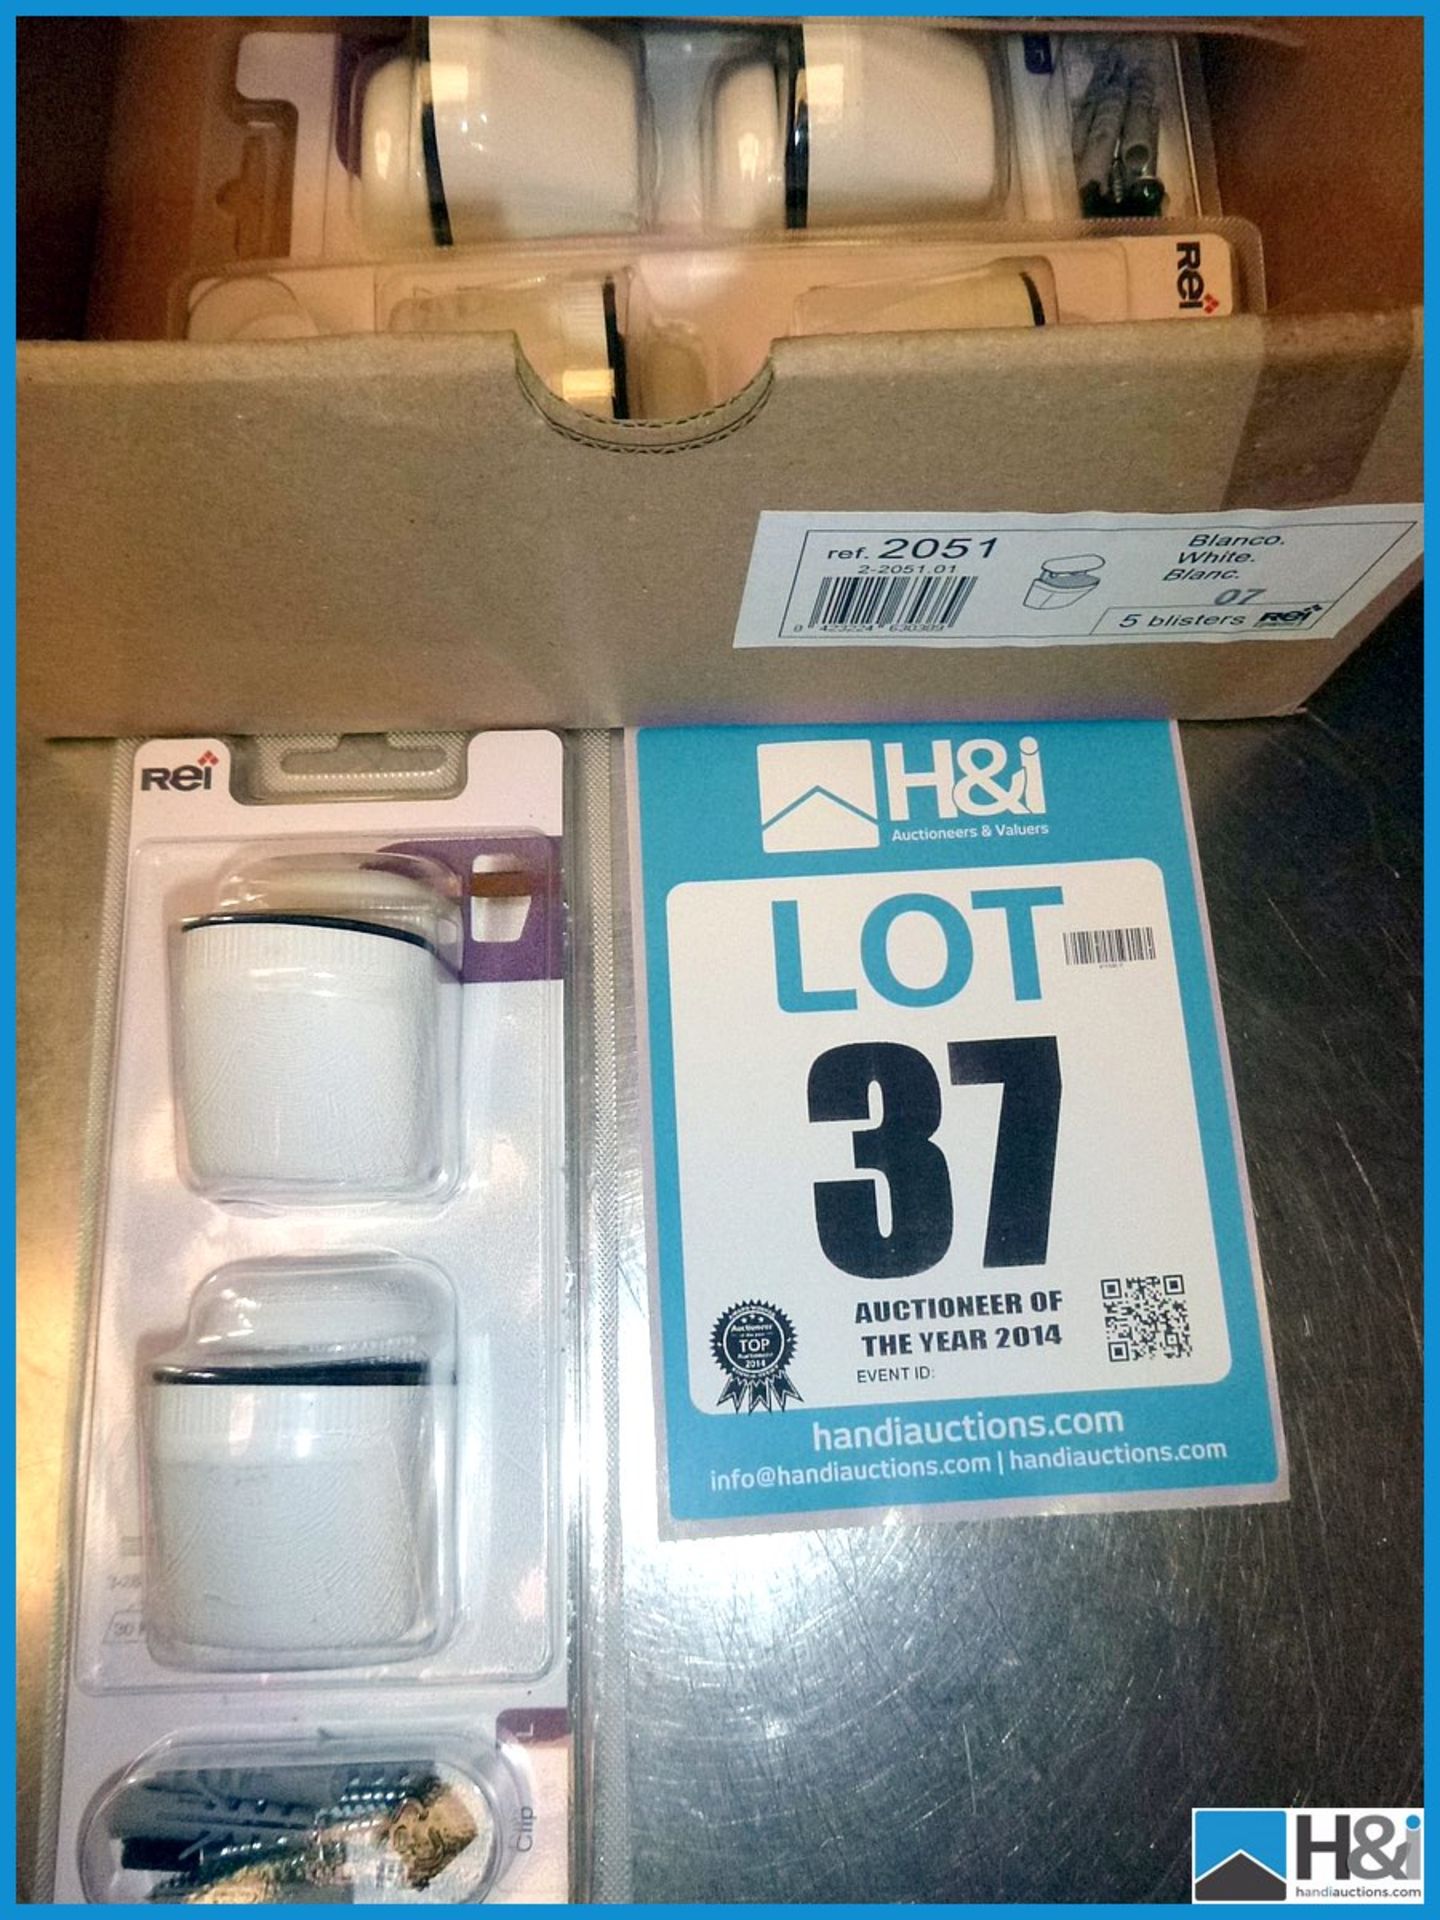 4 OFF PACKS - REI WHITE SHELVING BRACKETS, PART NUMBER - 2051, UNUSED AND RETAIL PACKAGED Appraisal: